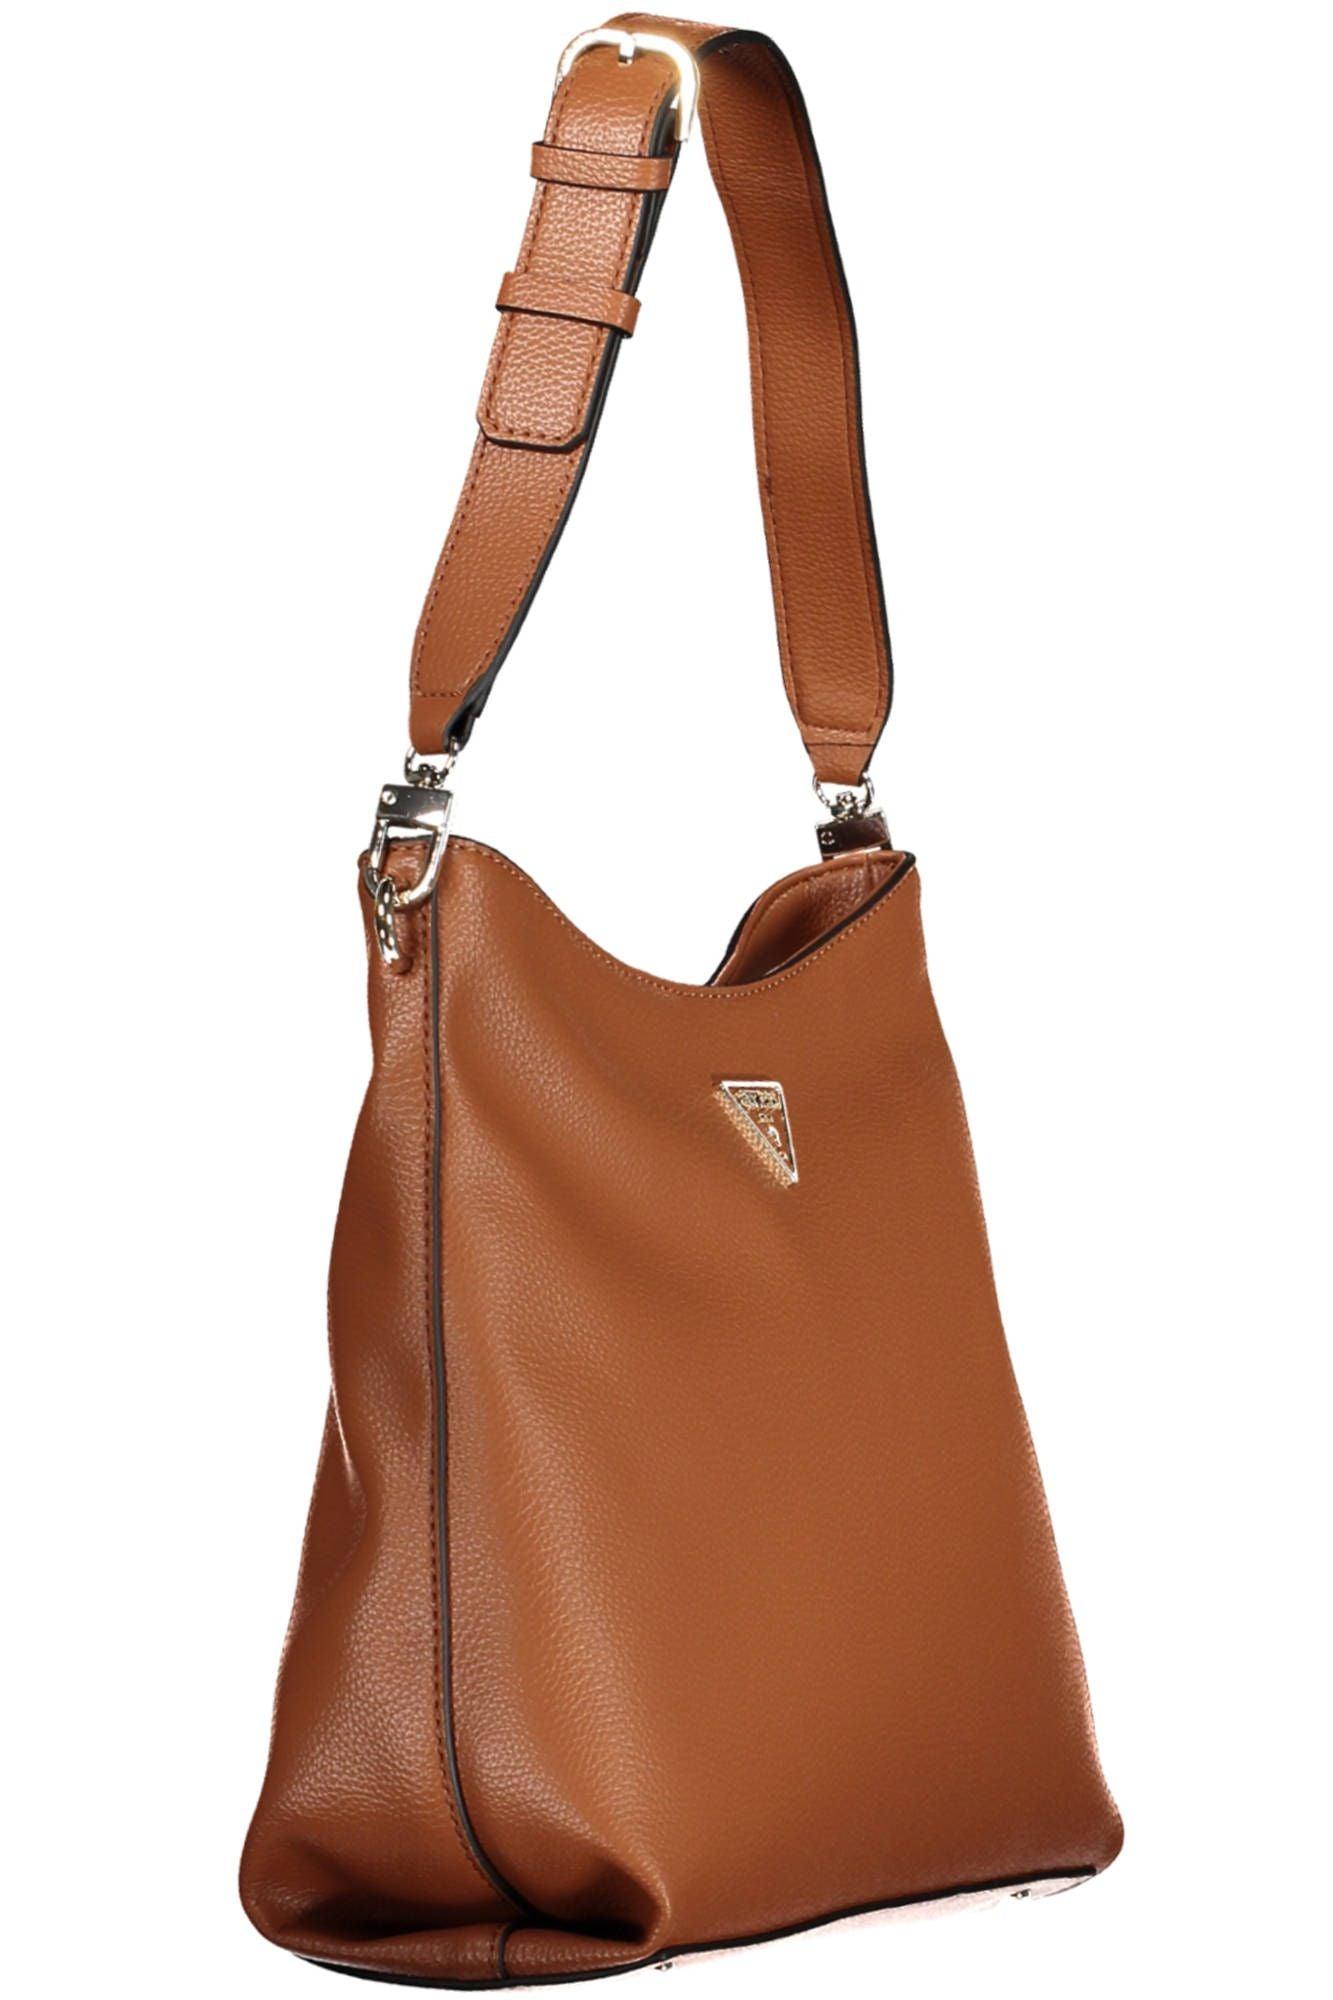 Guess Jeans Chic Brown Shoulder Bag with Logo Detail - PER.FASHION